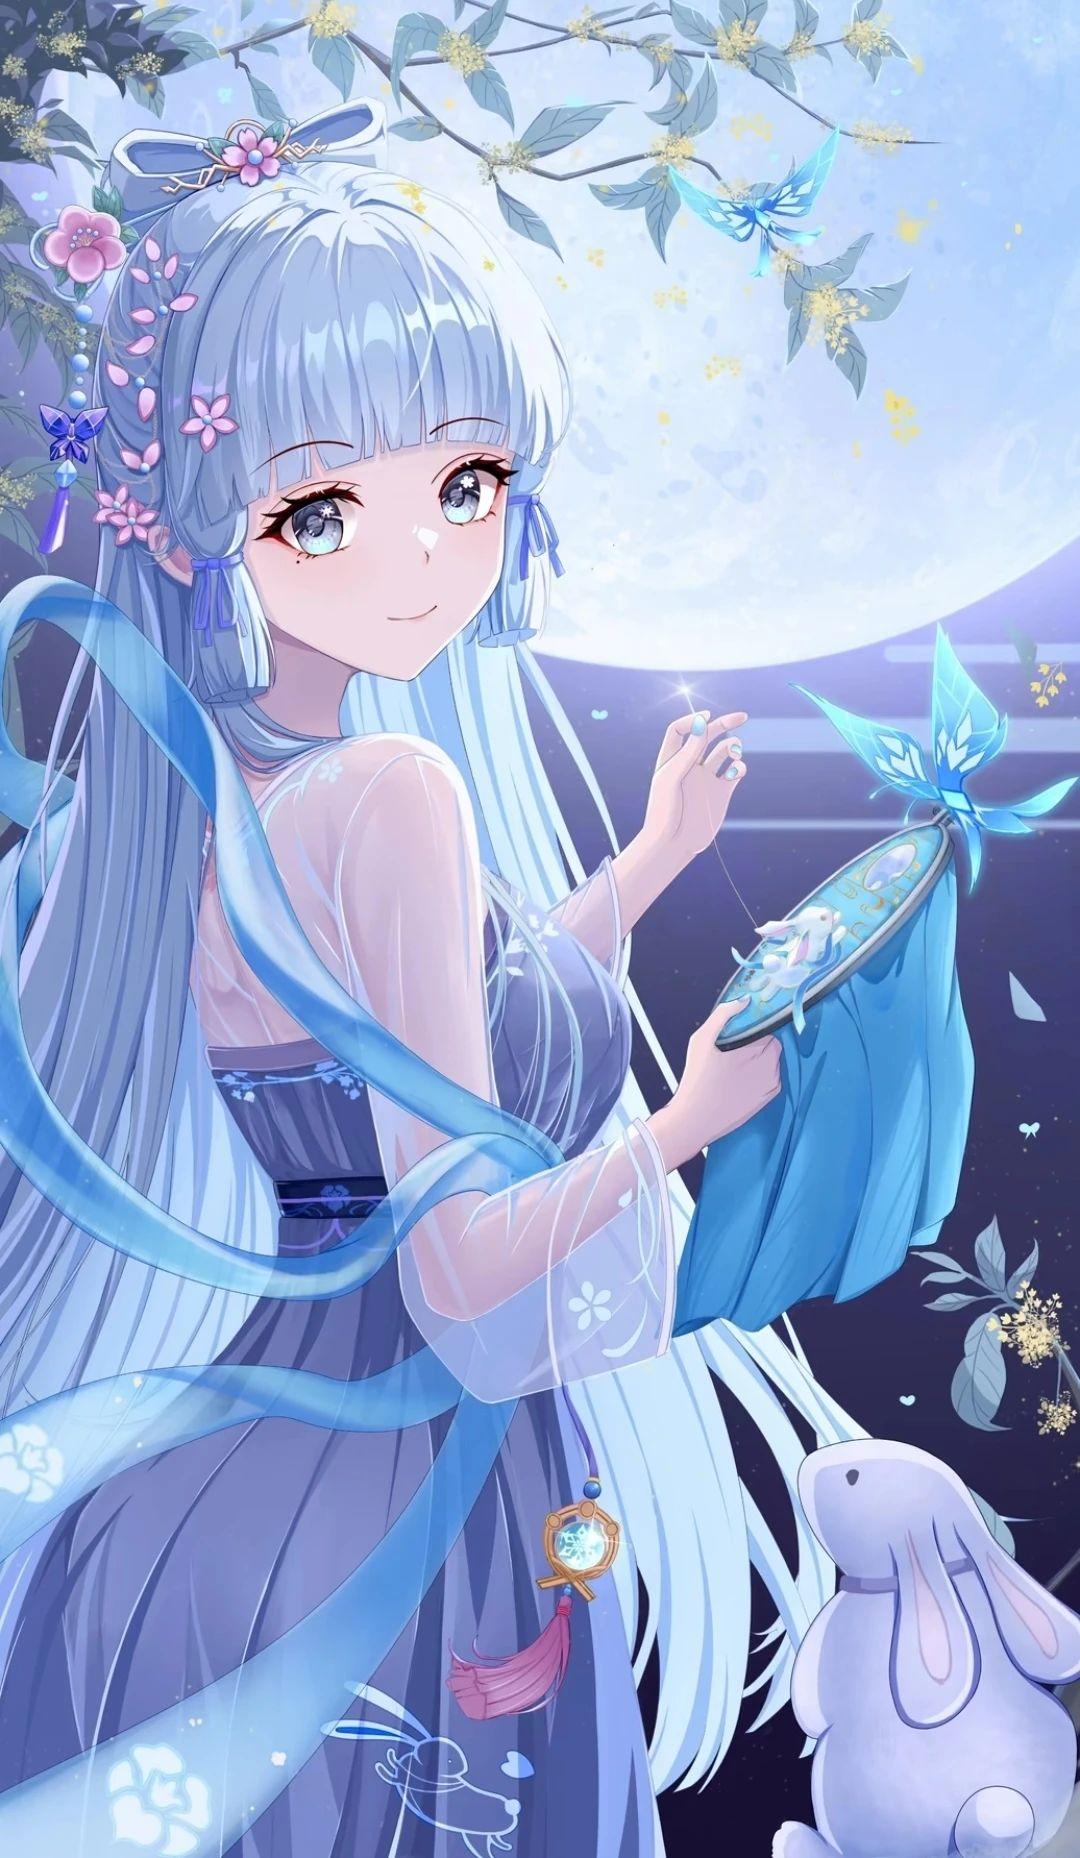 HD wallpaper, Sewing, Leaves, Animals, Mole Under Eye, Dress, Blue Nails, Portrait Display, Rabbits, Night, Branch, Moles, Petals, Genshin Impact, Moonlight, Looking At Viewer, Blue Hair, Long Hair, Smiling, Anime Girls, Needles, Anime, Blue Eyes, Standing, Closed Mouth, Flower In Hair, Moon